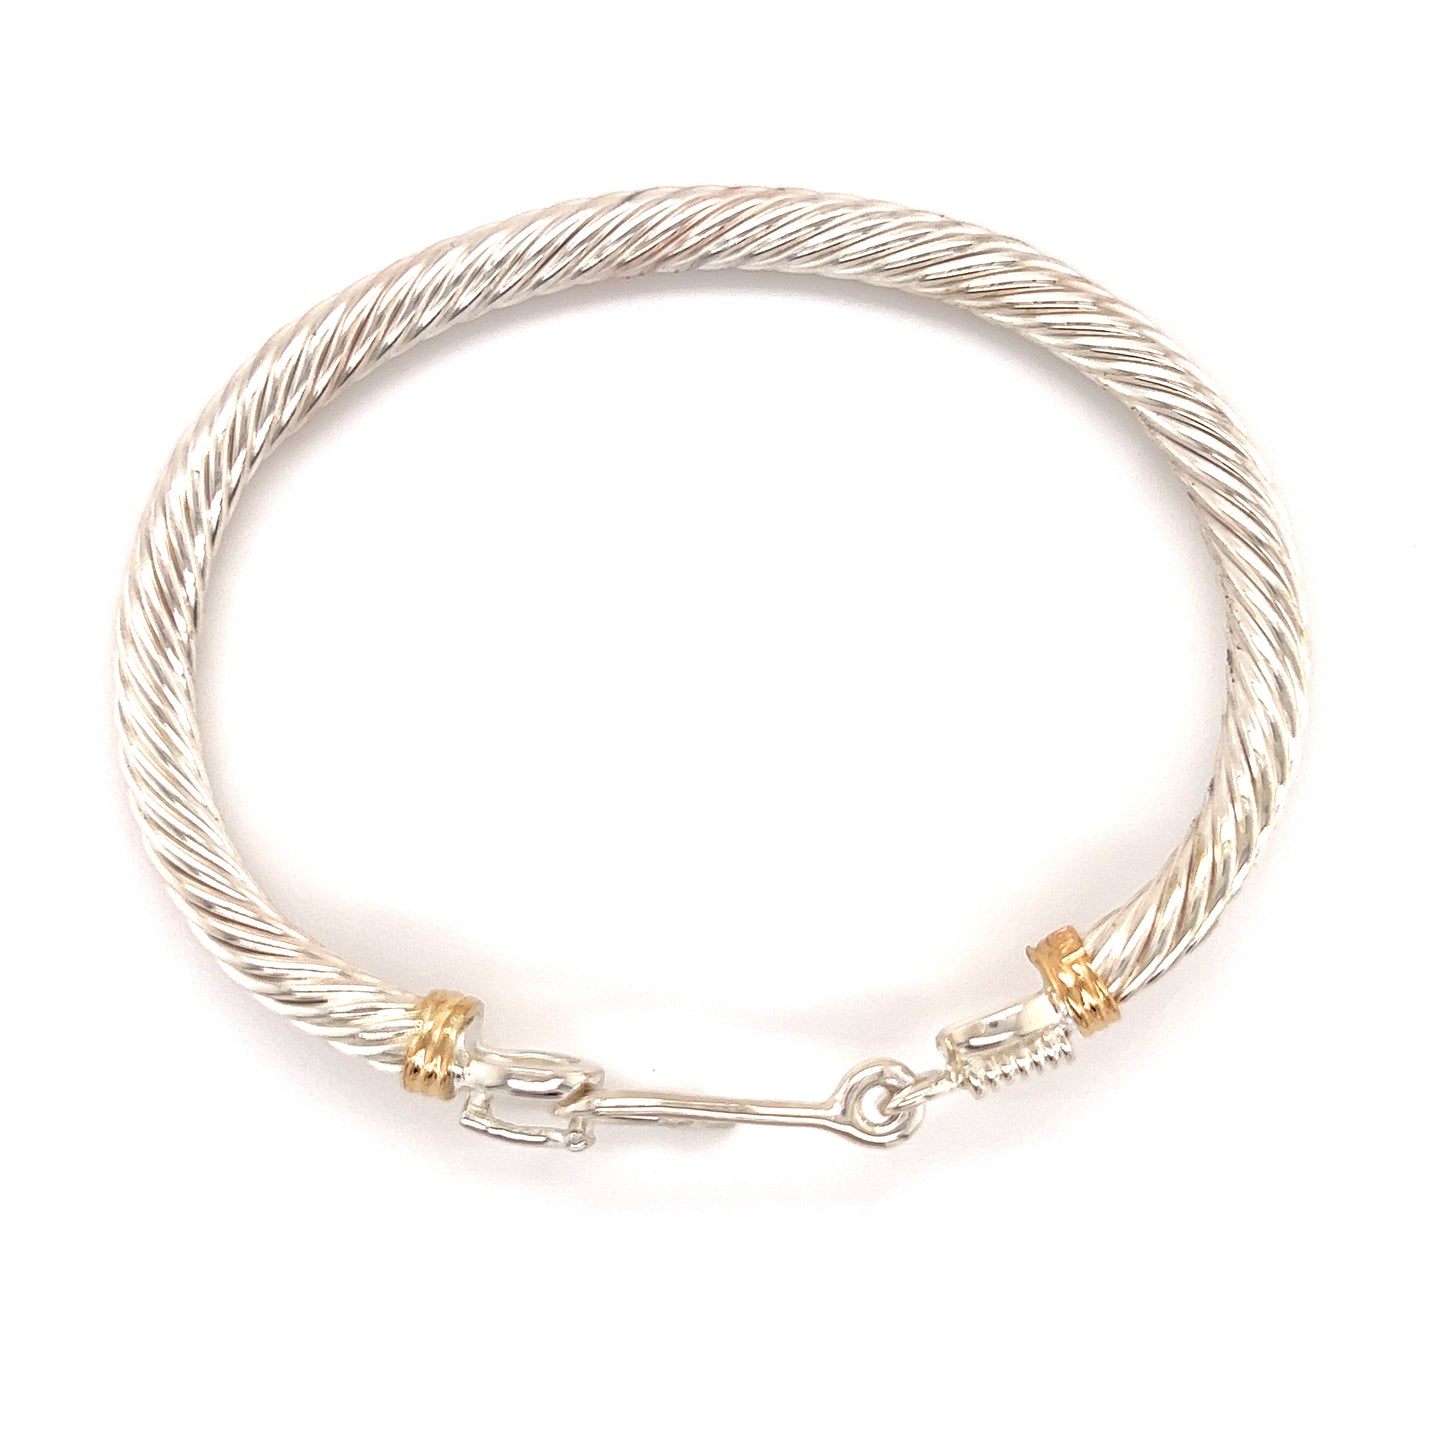 Fish Hook Cable 5mm Bangle Bracelet with 14K Wraps in Sterling Silver Top View